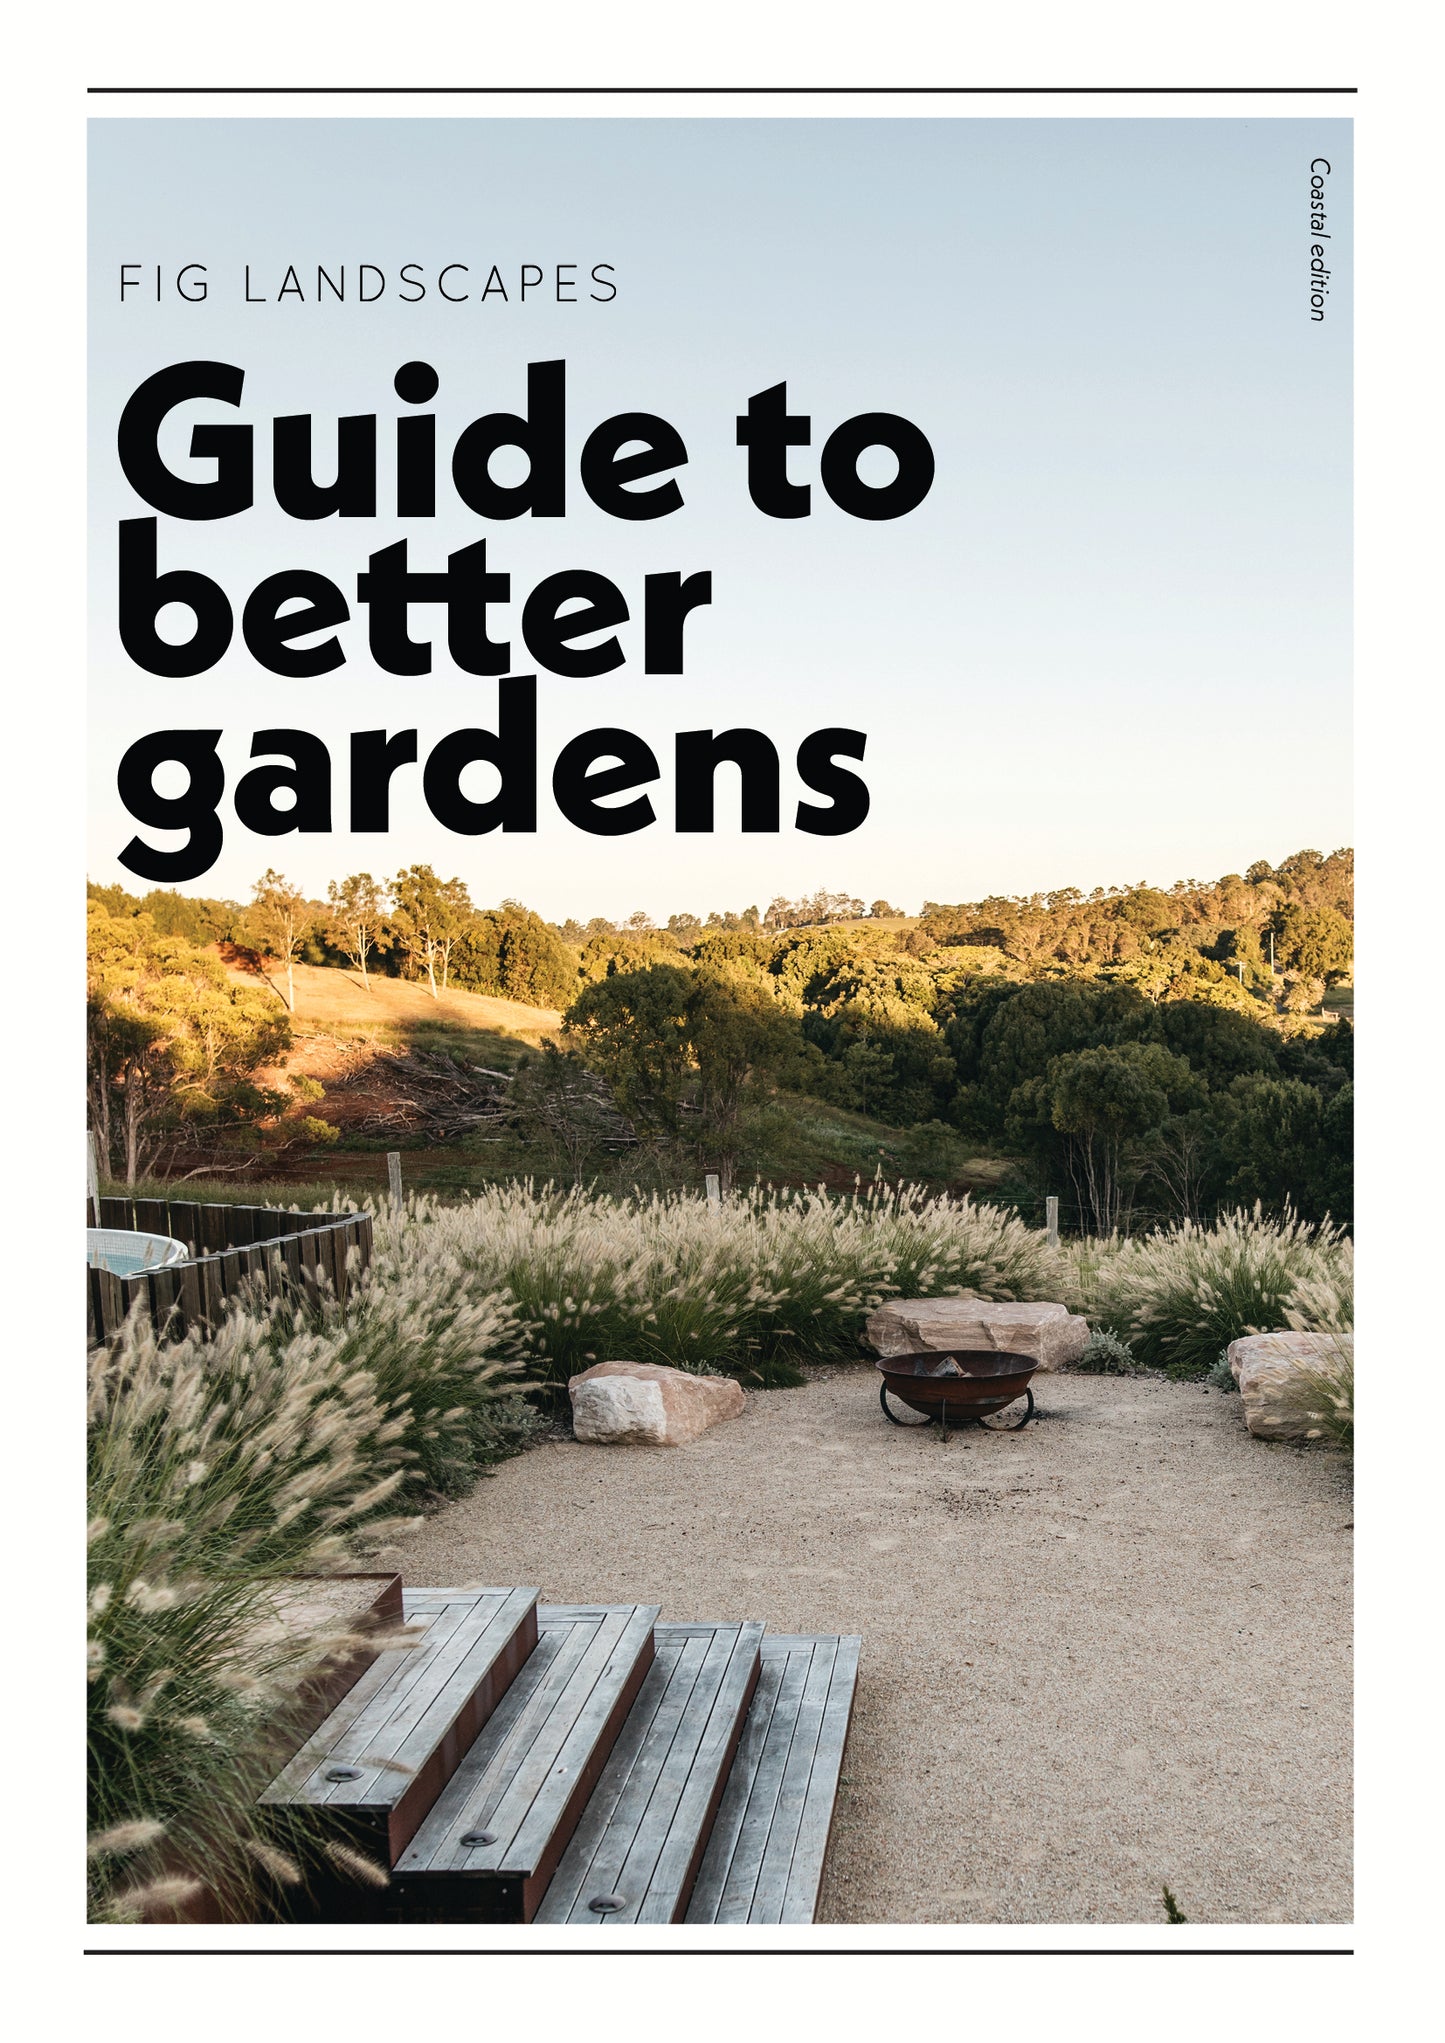 GUIDE TO BETTER GARDENS